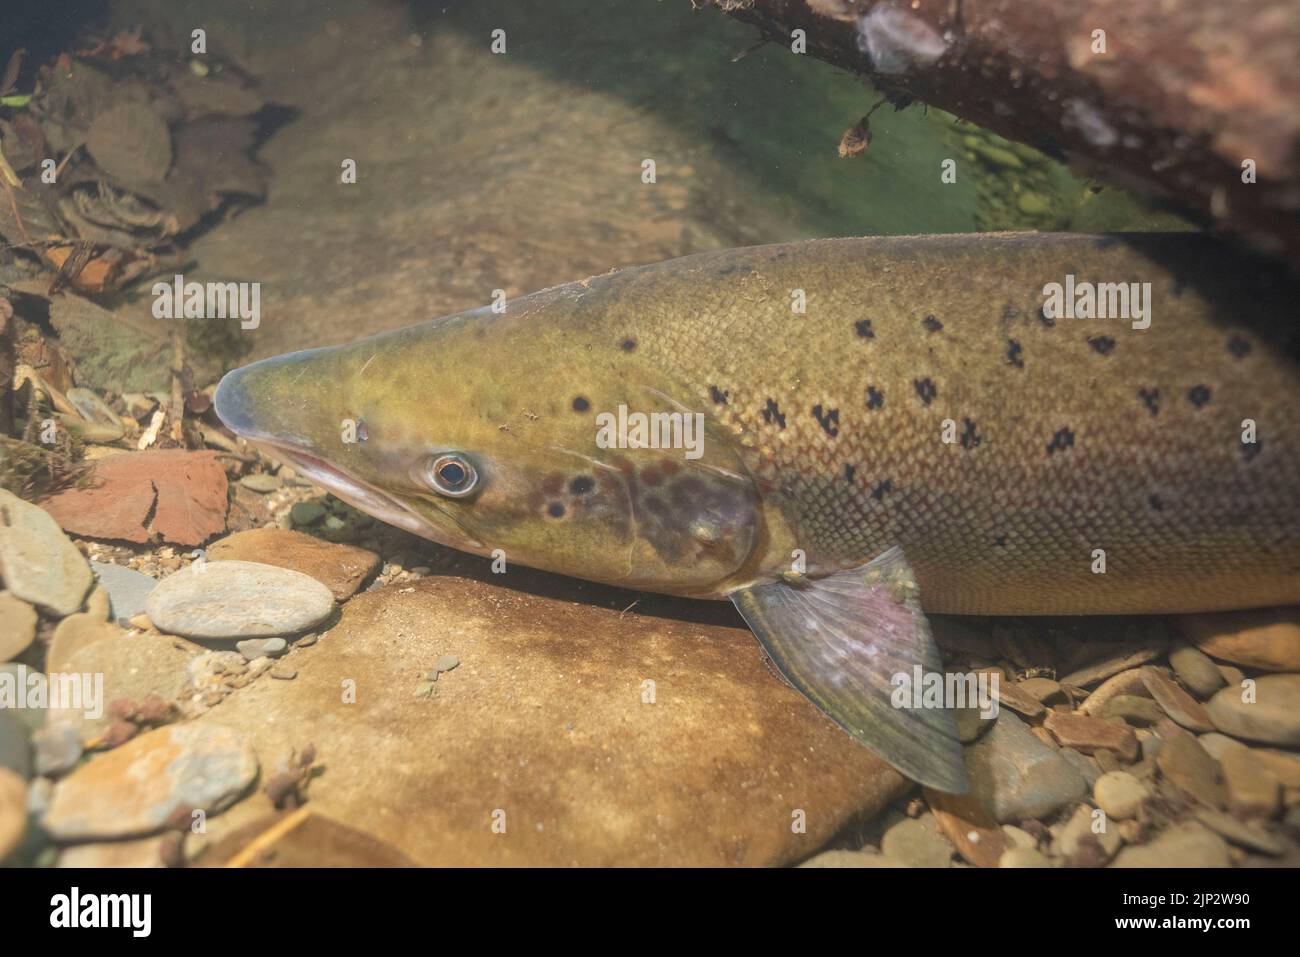 A salmon (Salmo salar) takes refuge under woody debris in a deep pool in the River Cothi during the heat wave on 13th August  2002. Wales, UK. Stock Photo